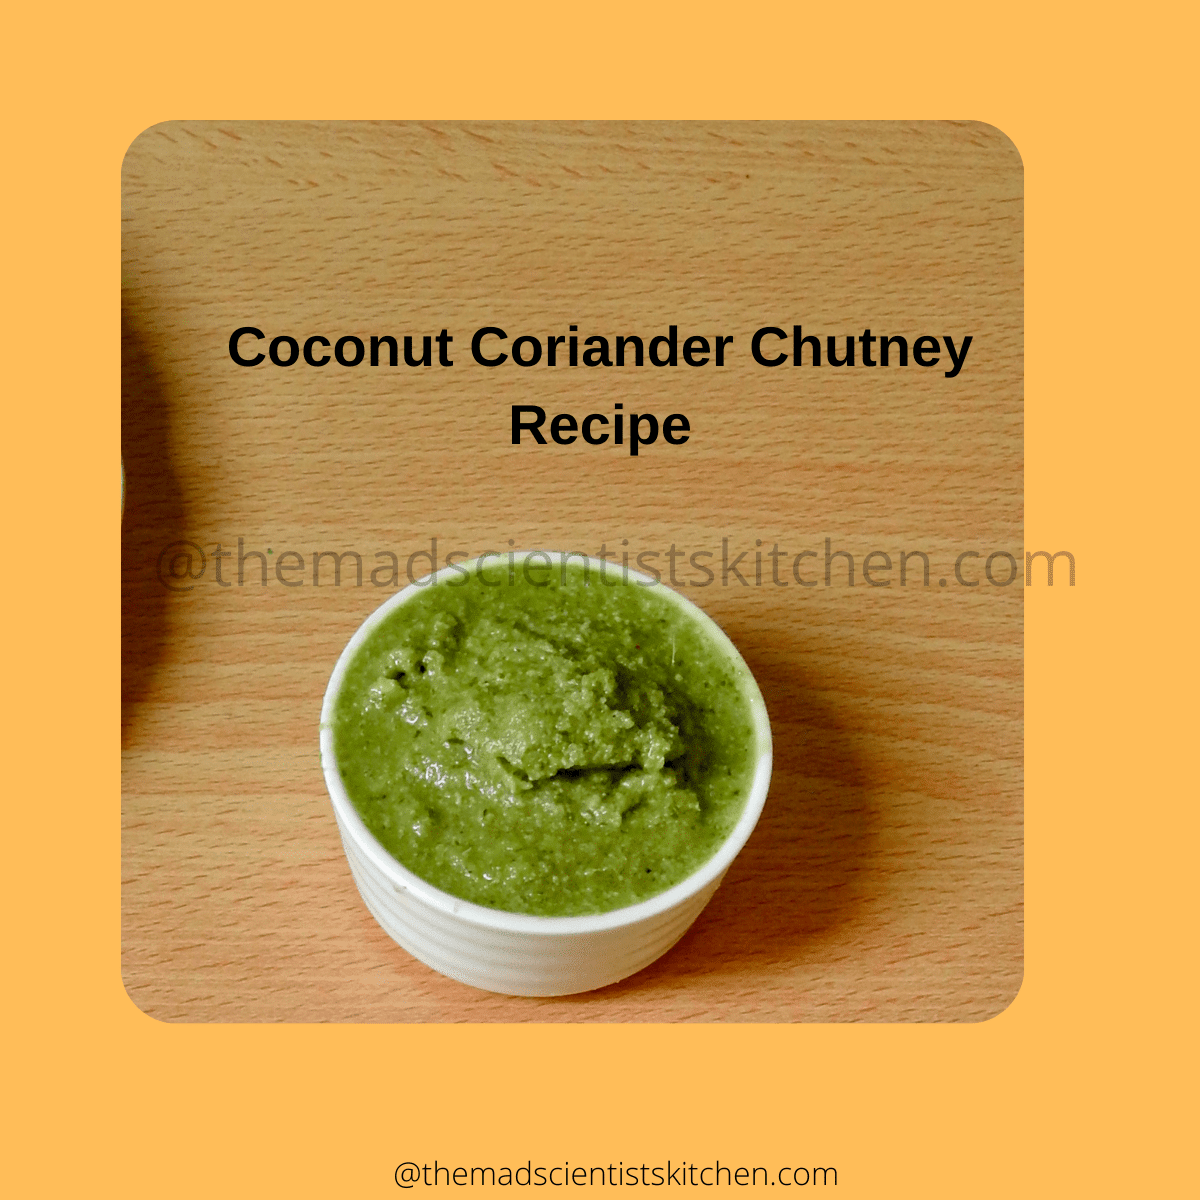 Dishing up some coconut and coriander chutney to go with breakfast